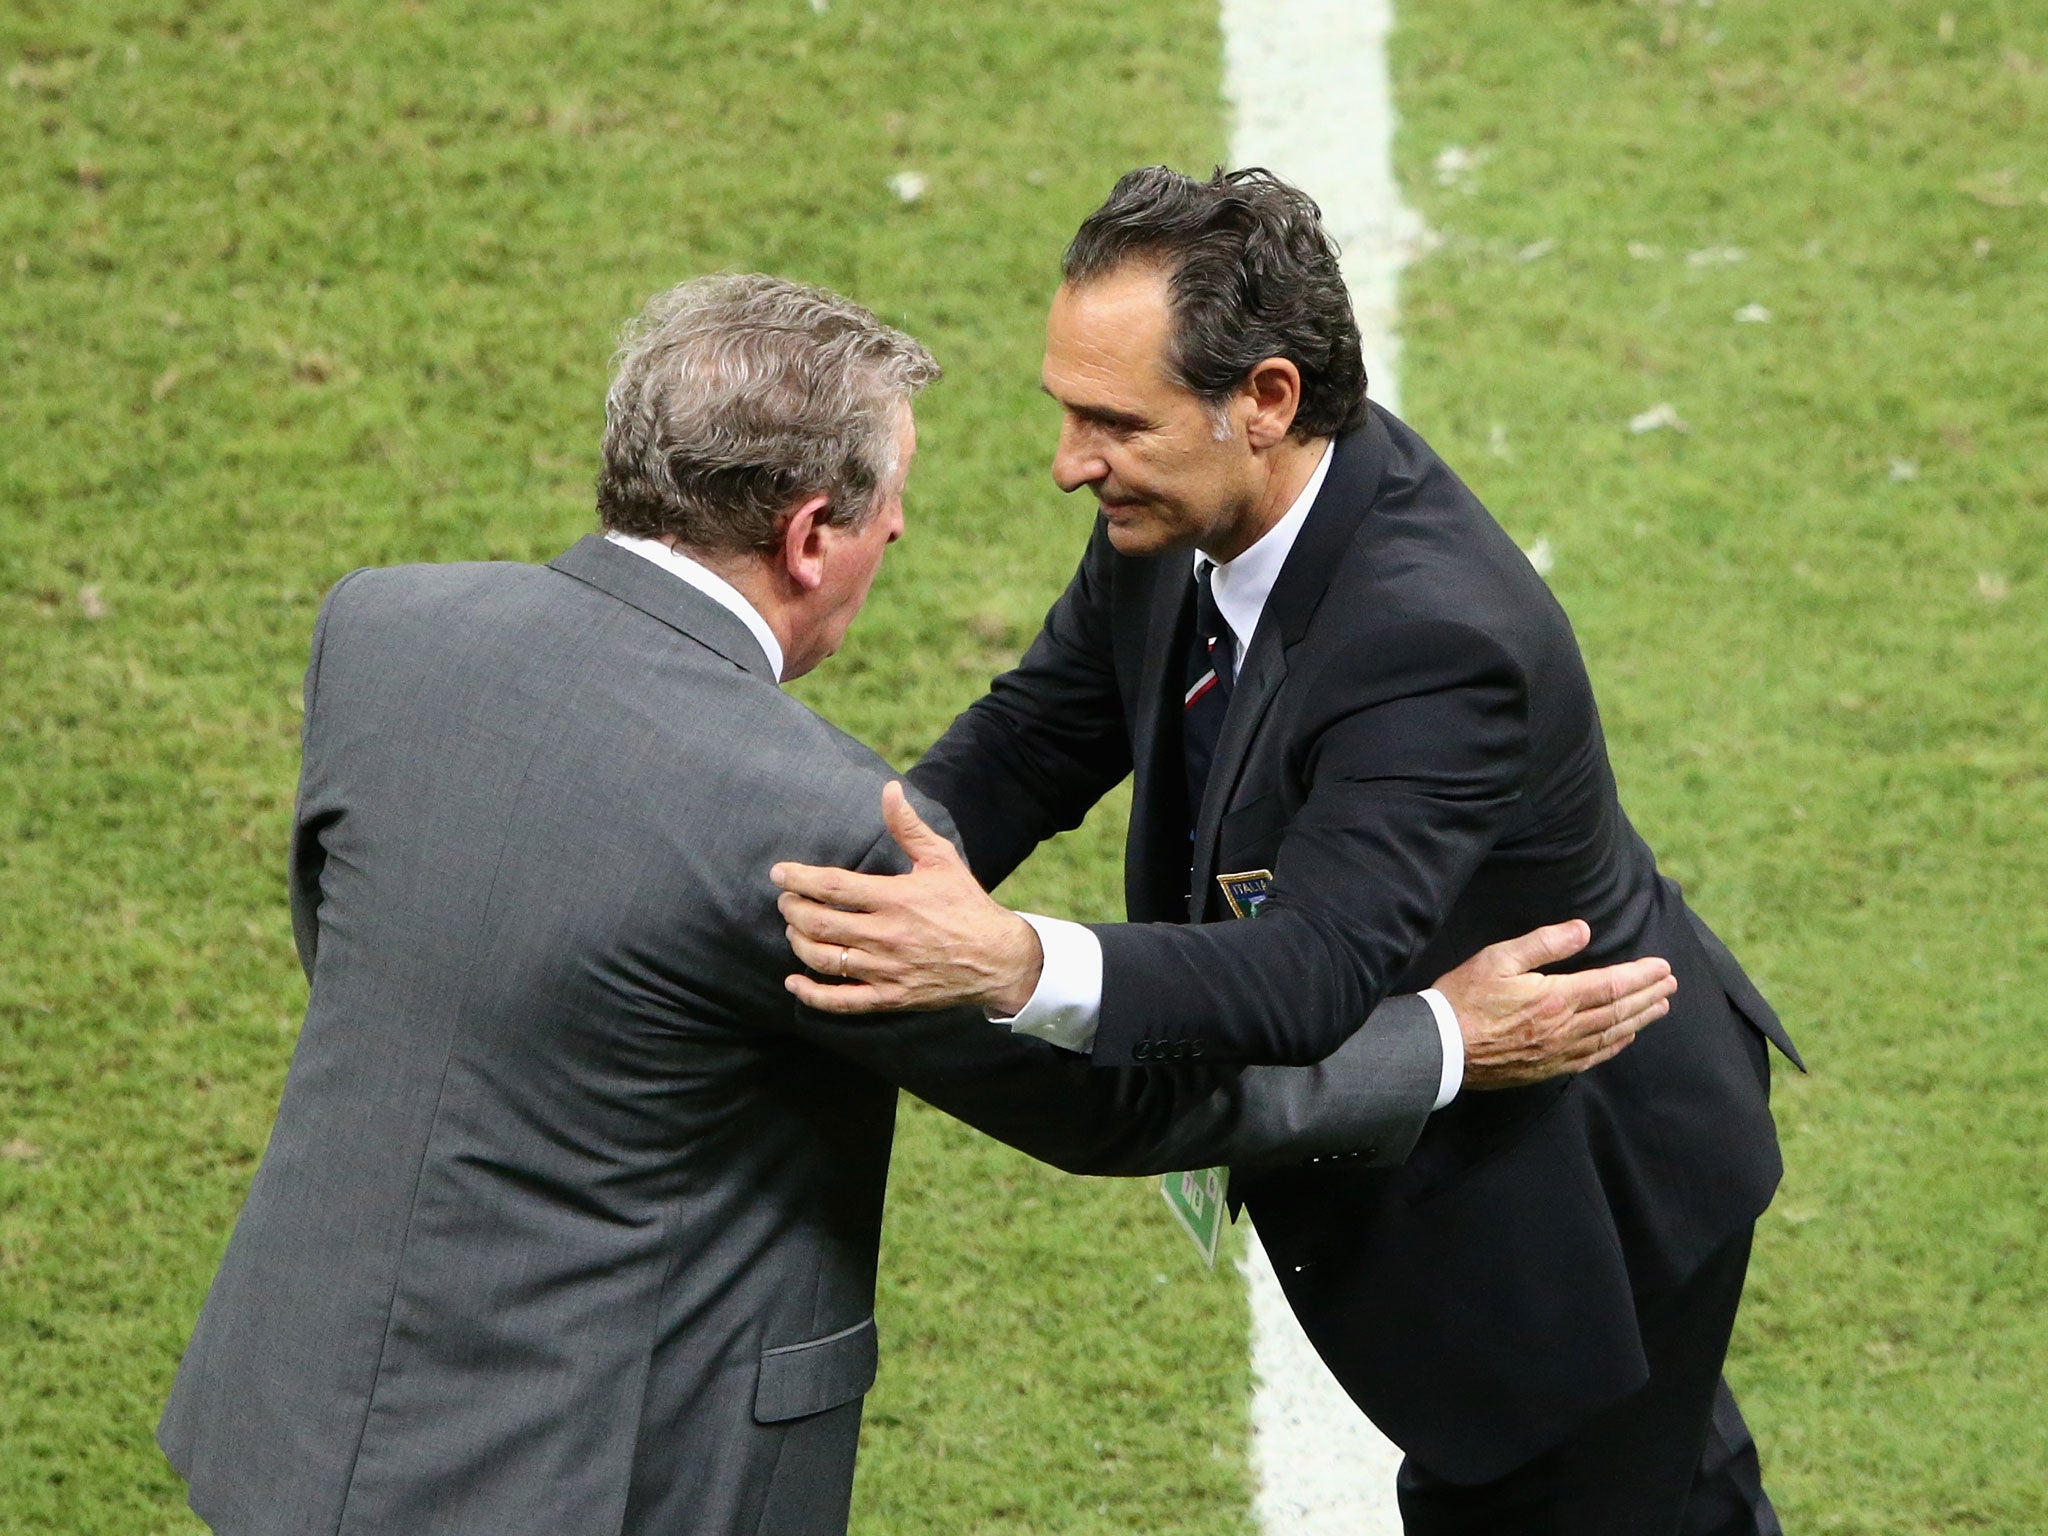 Cesare Prandelli has called England one of the best sides at the World Cup after his Italy team beat them 2-1 in Manuas